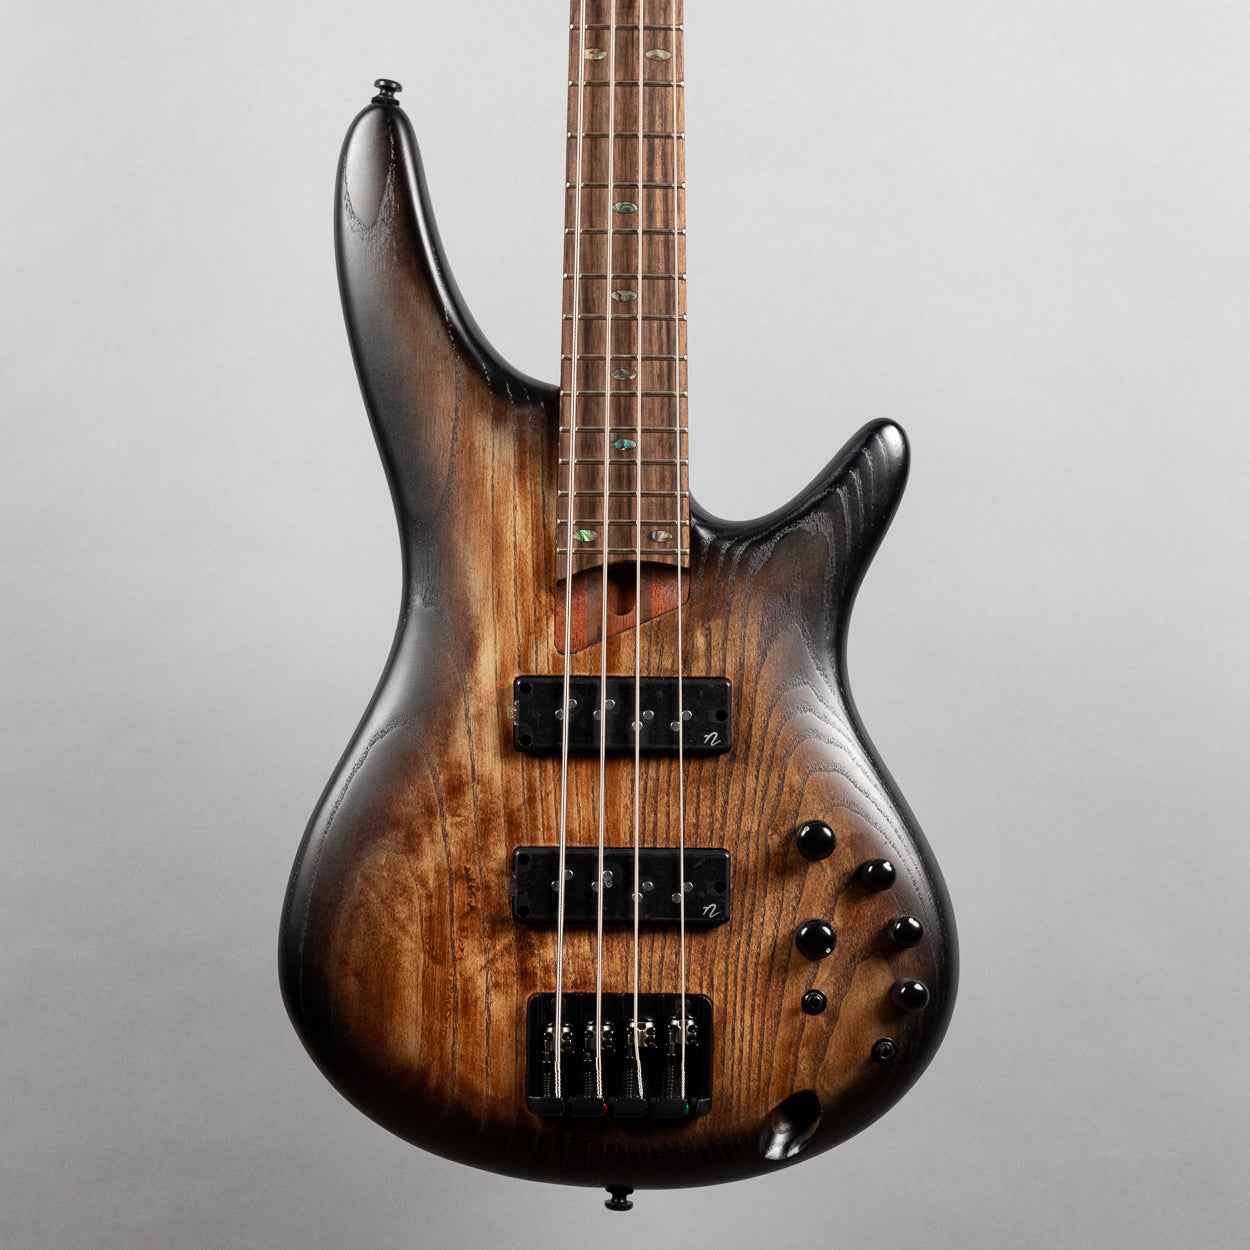 Ibanez SR600E-AST 4-String Bass in Antique Brown Stained Burst (I221211779)